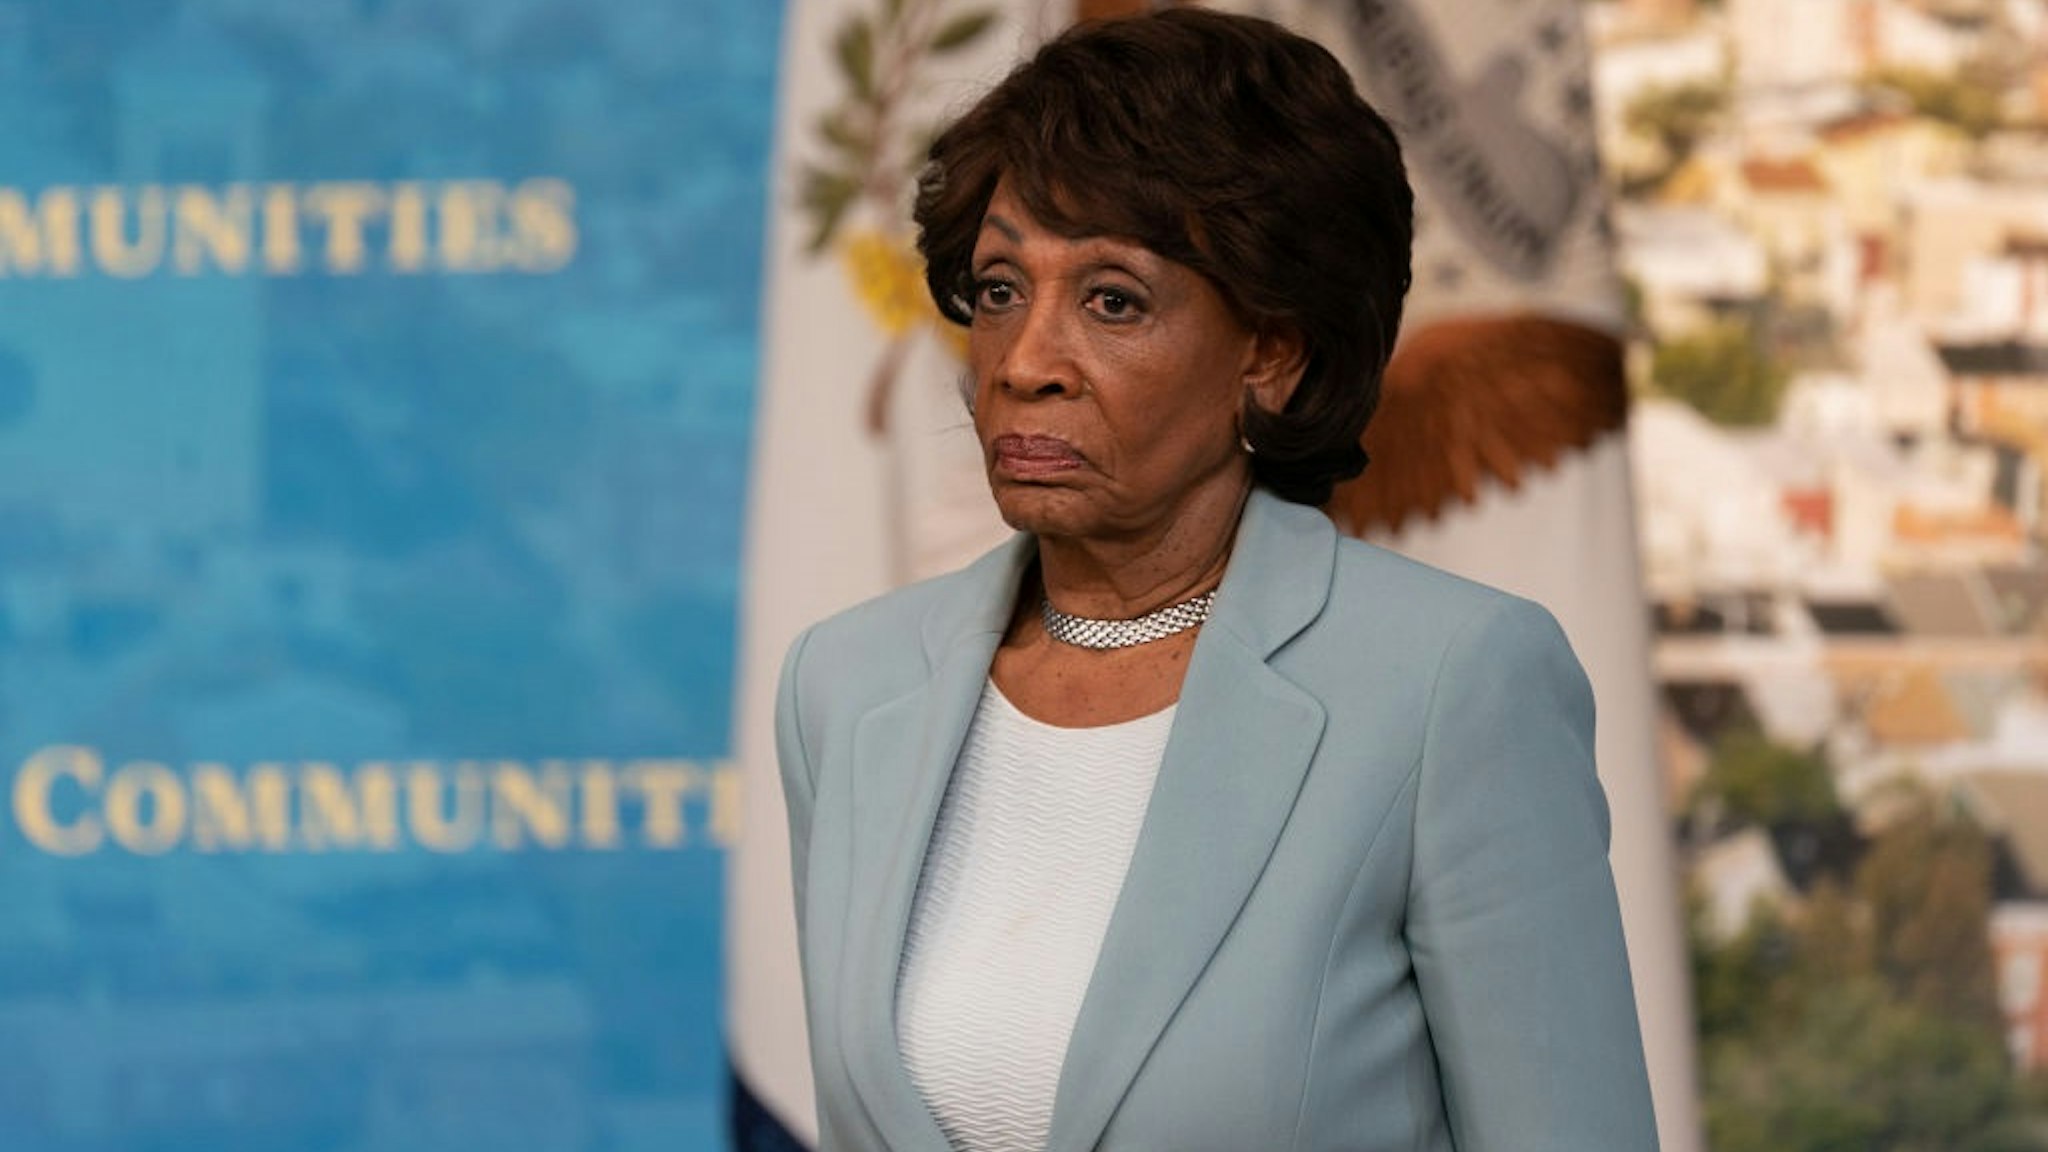 Representative Maxine Waters, a Democrat from California, listens during an event in the Eisenhower Executive Office Building in Washington, D.C., U.S., on Tuesday, June 15, 2021.